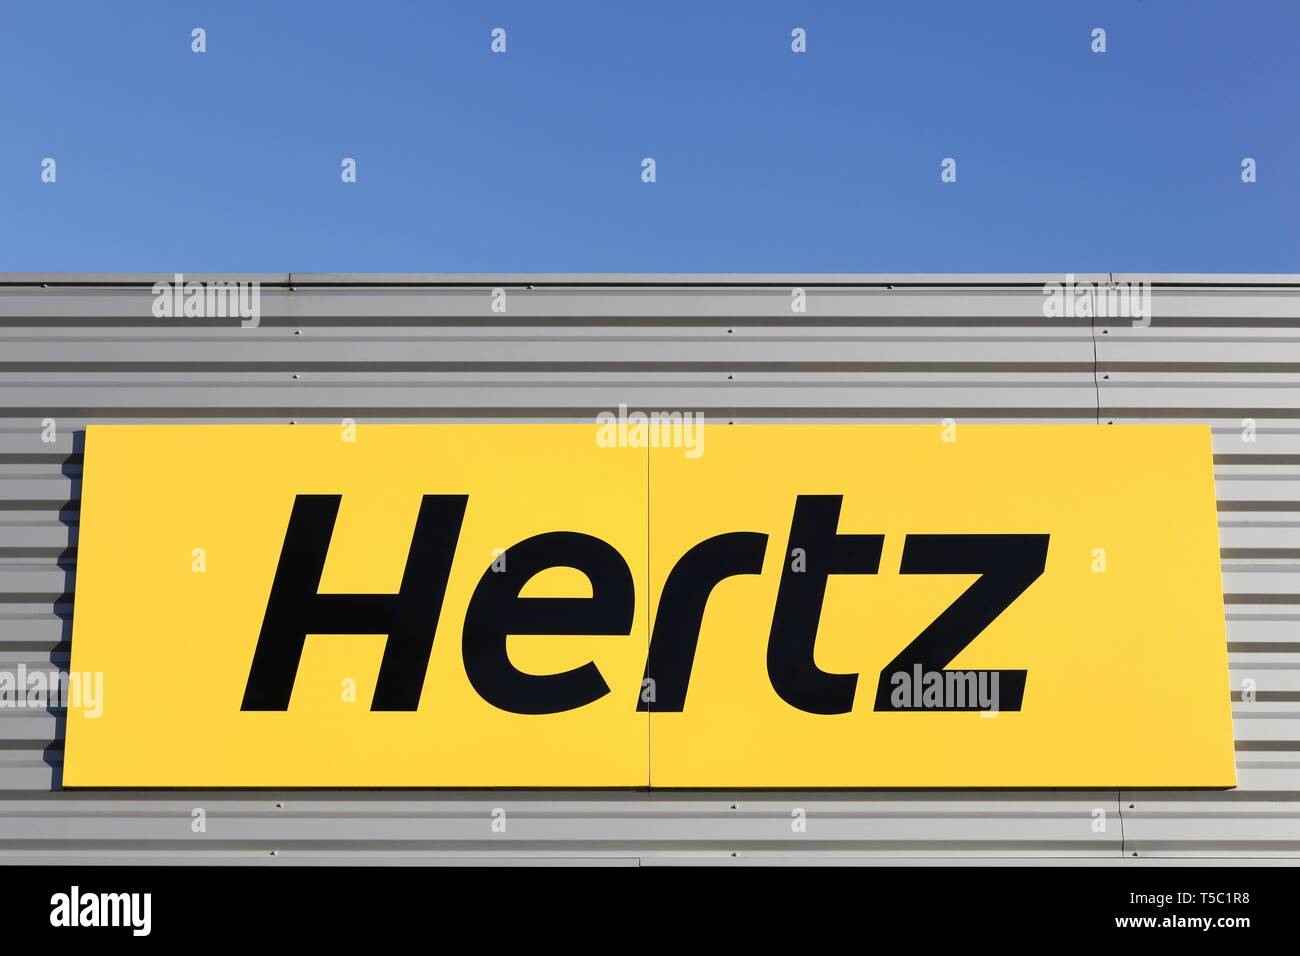 Bourg, France - April 5, 2019: Hertz logo on a wall. Hertz is an American car rental company with international locations in 145 countries worldwide Stock Photo